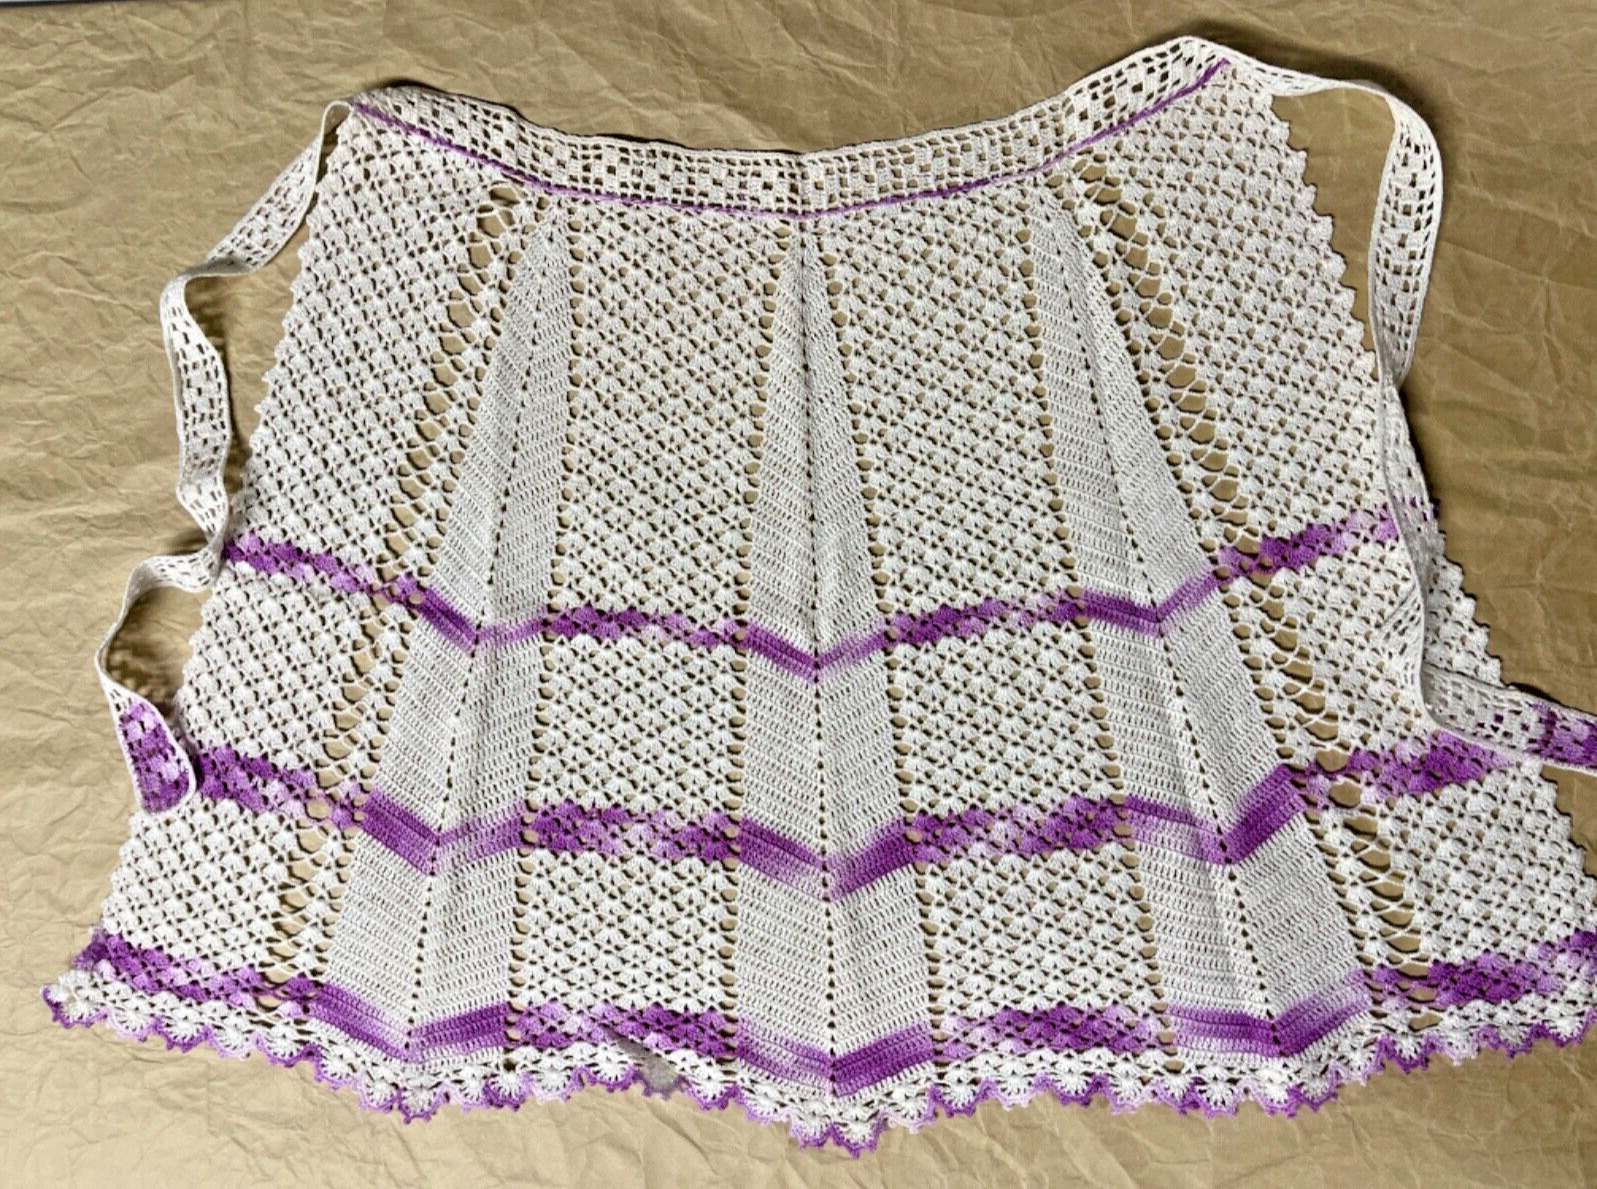 Vintage Hand Crocheted Apron with Purple Accents - SWEET